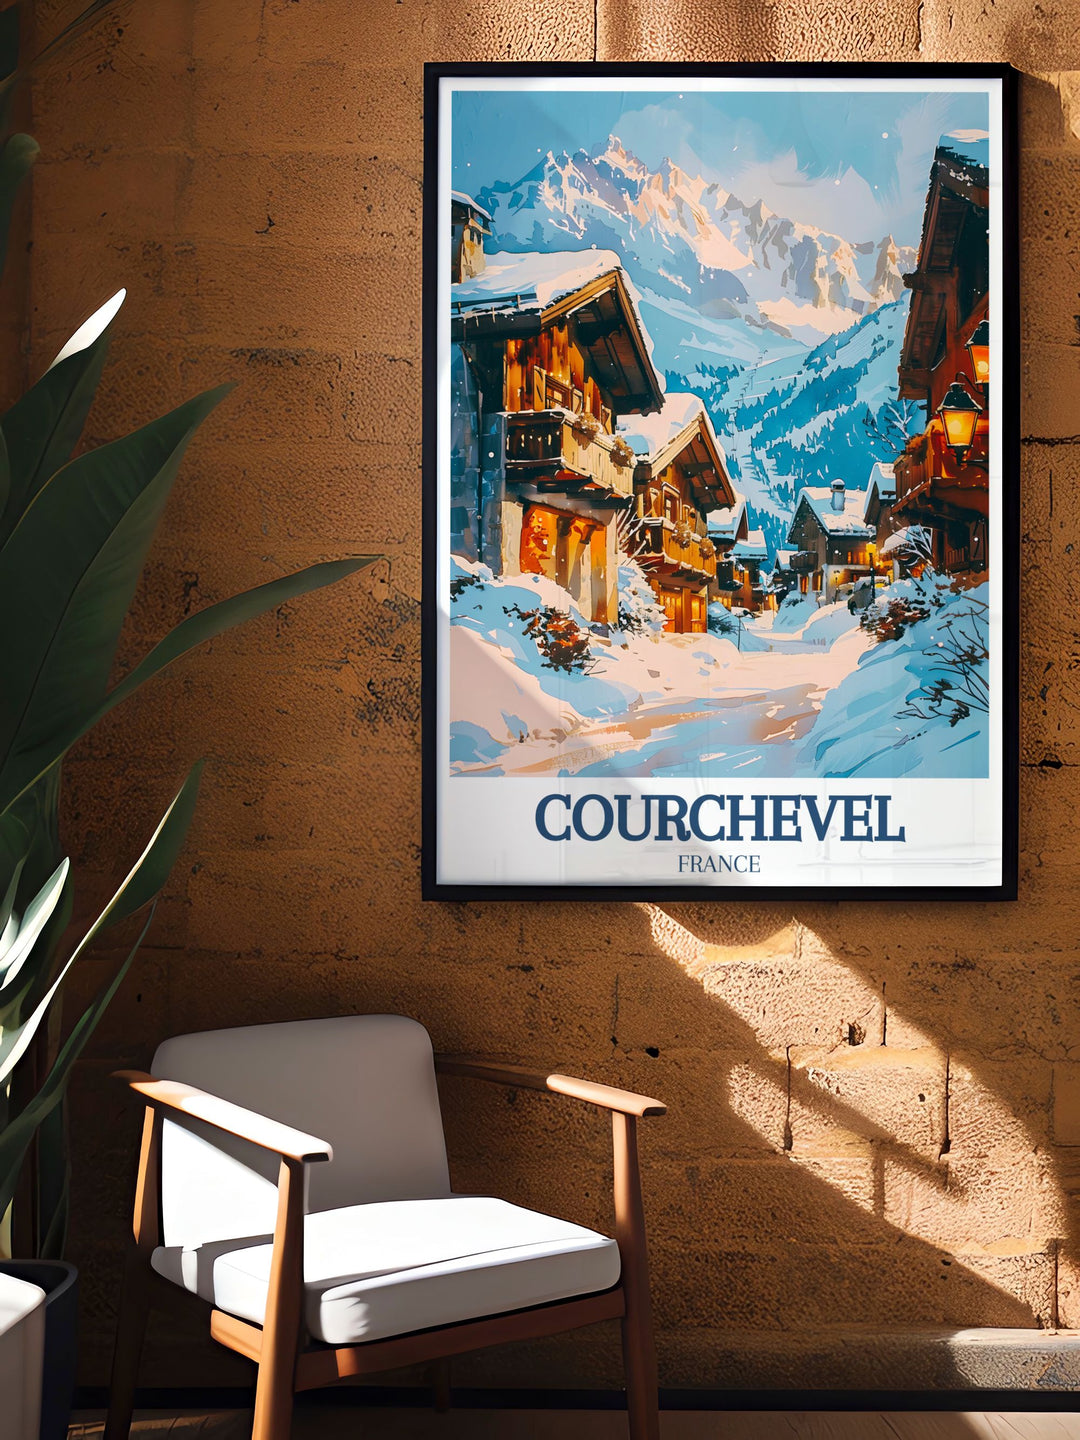 Illustrated with care, this travel poster brings to life the majestic beauty of Courchevel 1850 and the vibrant skiing culture, ideal for enhancing any room with Frances alpine charm.